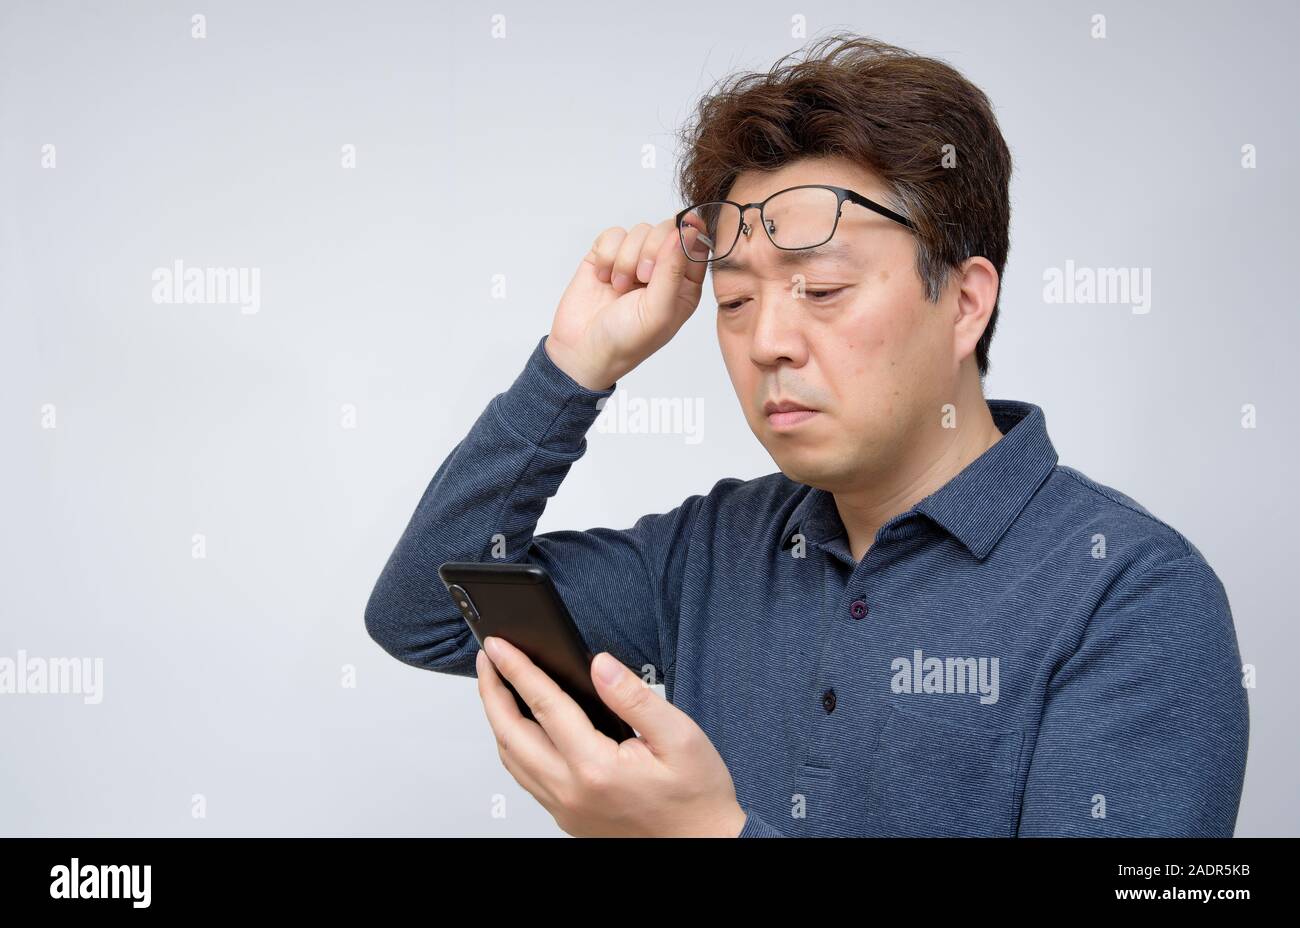 Asian male trying to read something on his mobile phone. poor sight, presbyopia, myopia. Stock Photo